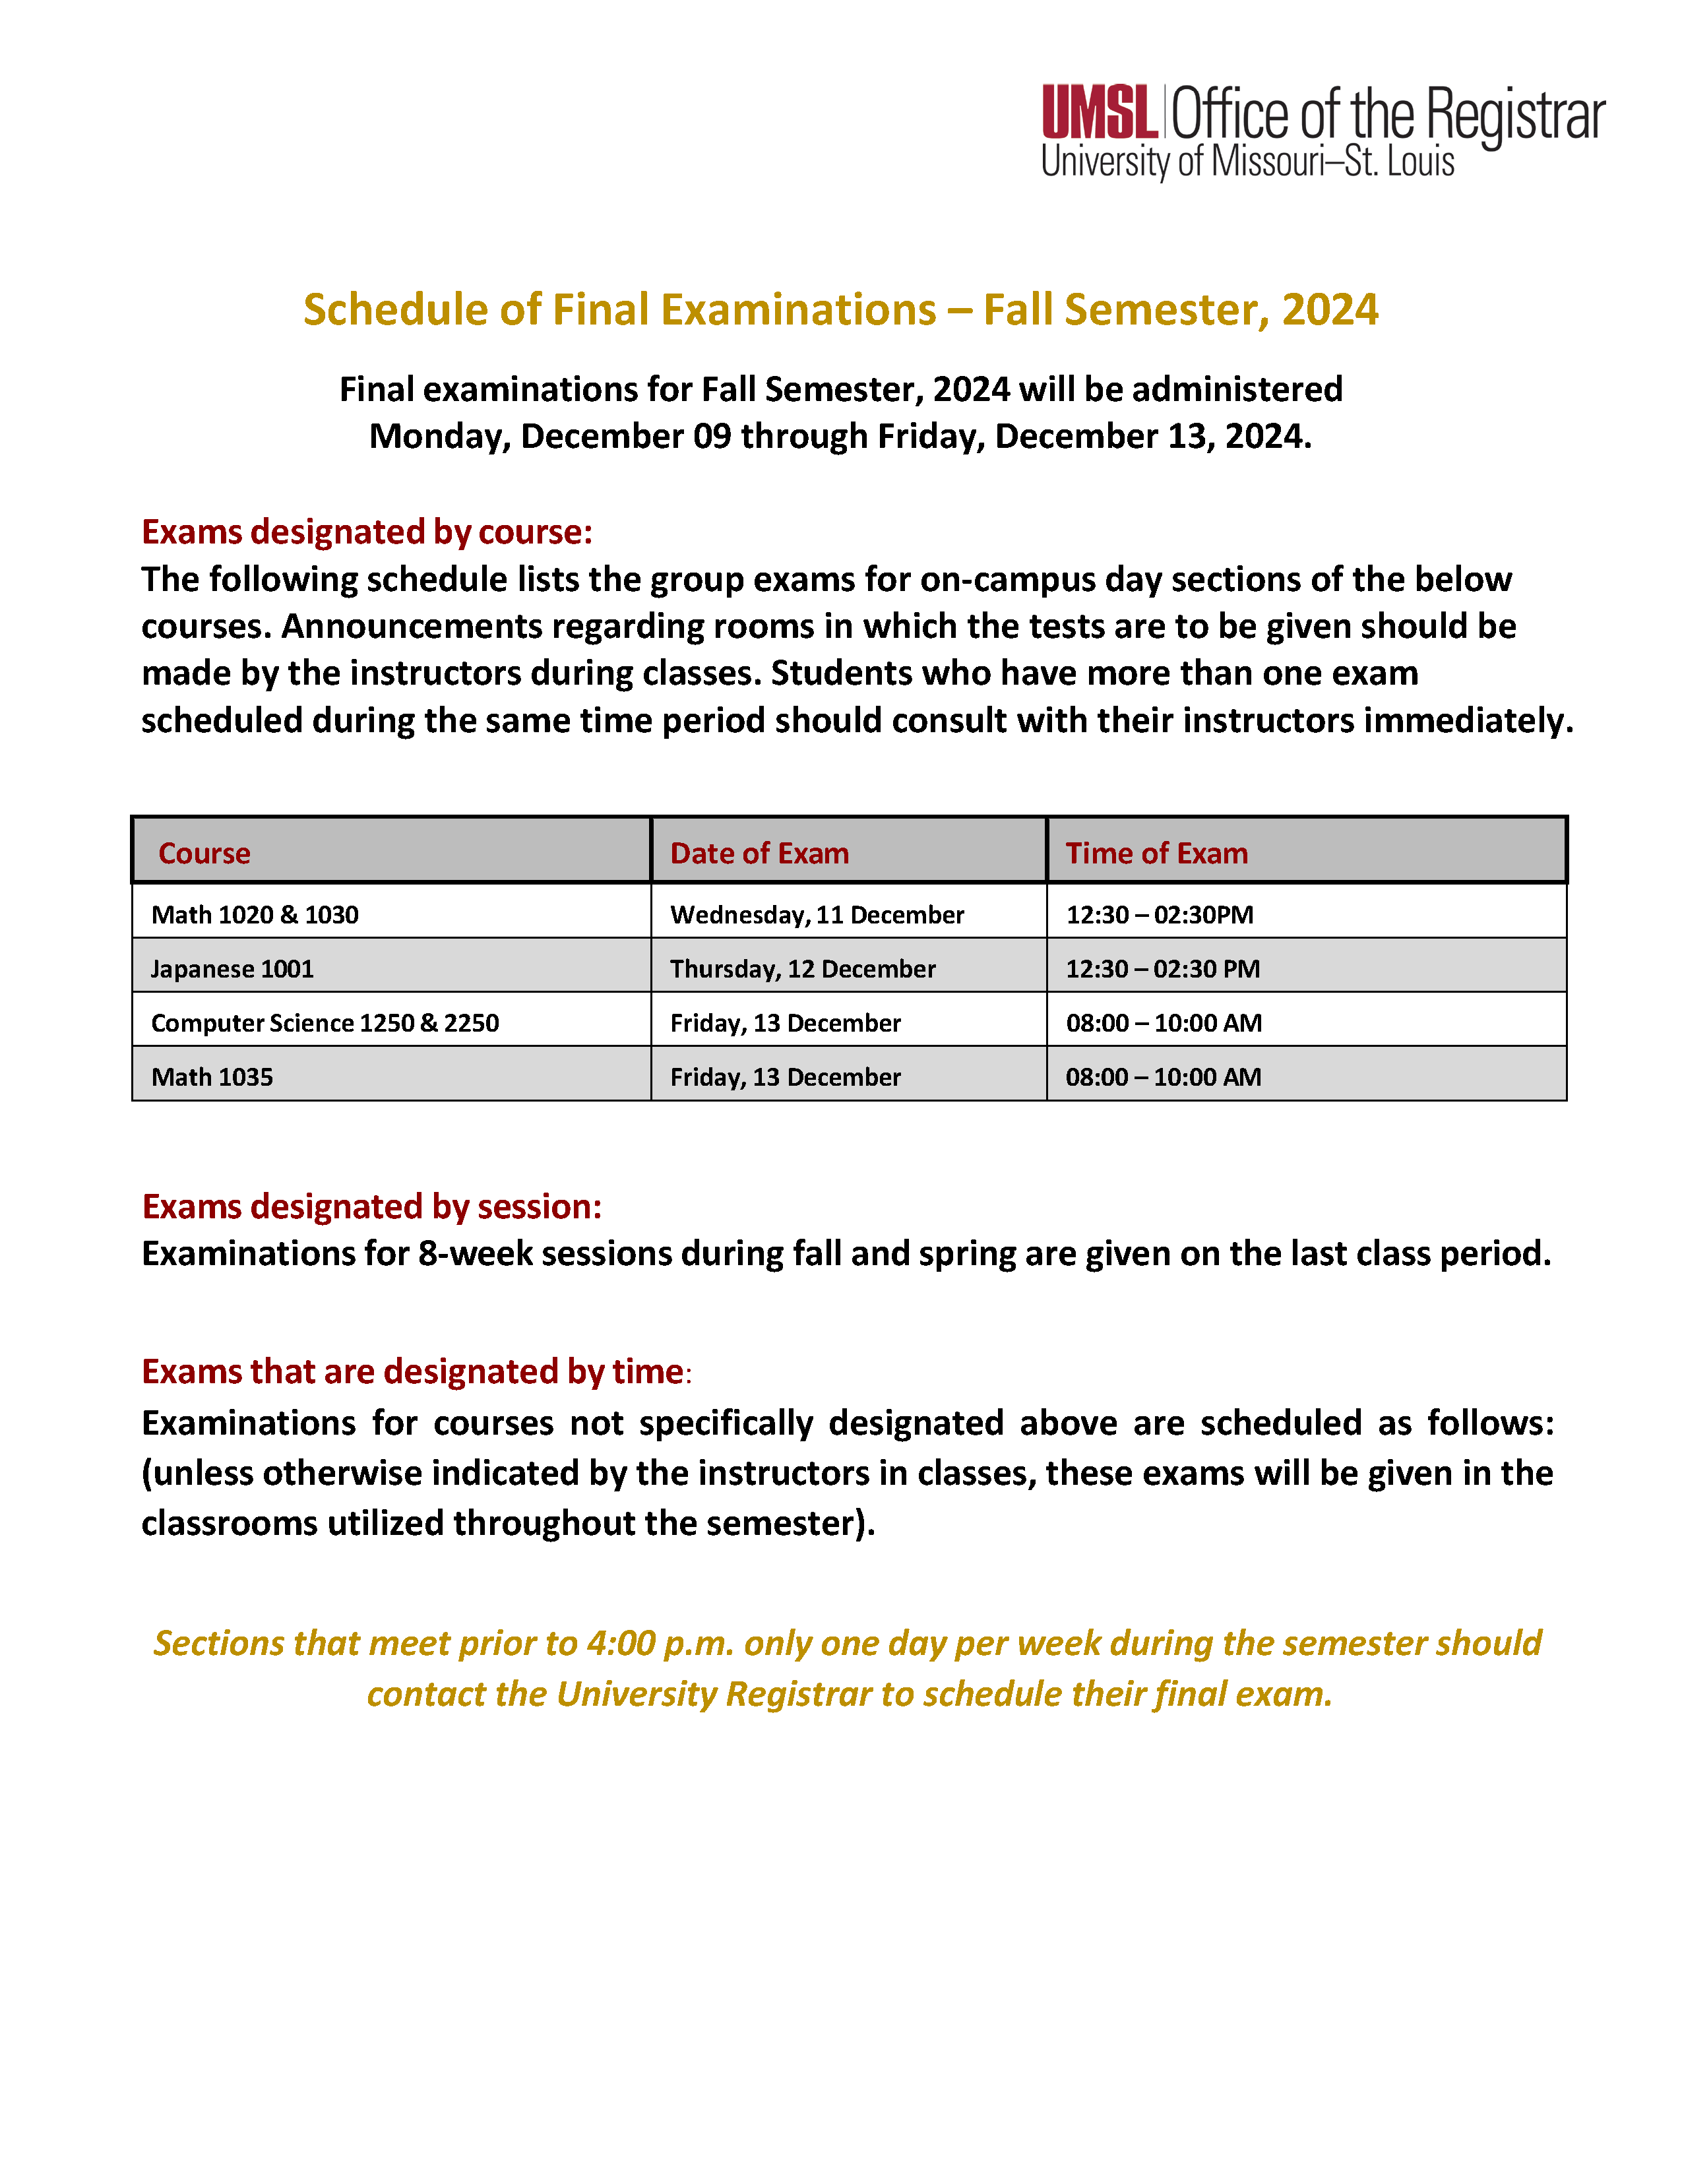 fall_24_final_exam_schedule_page_1.png